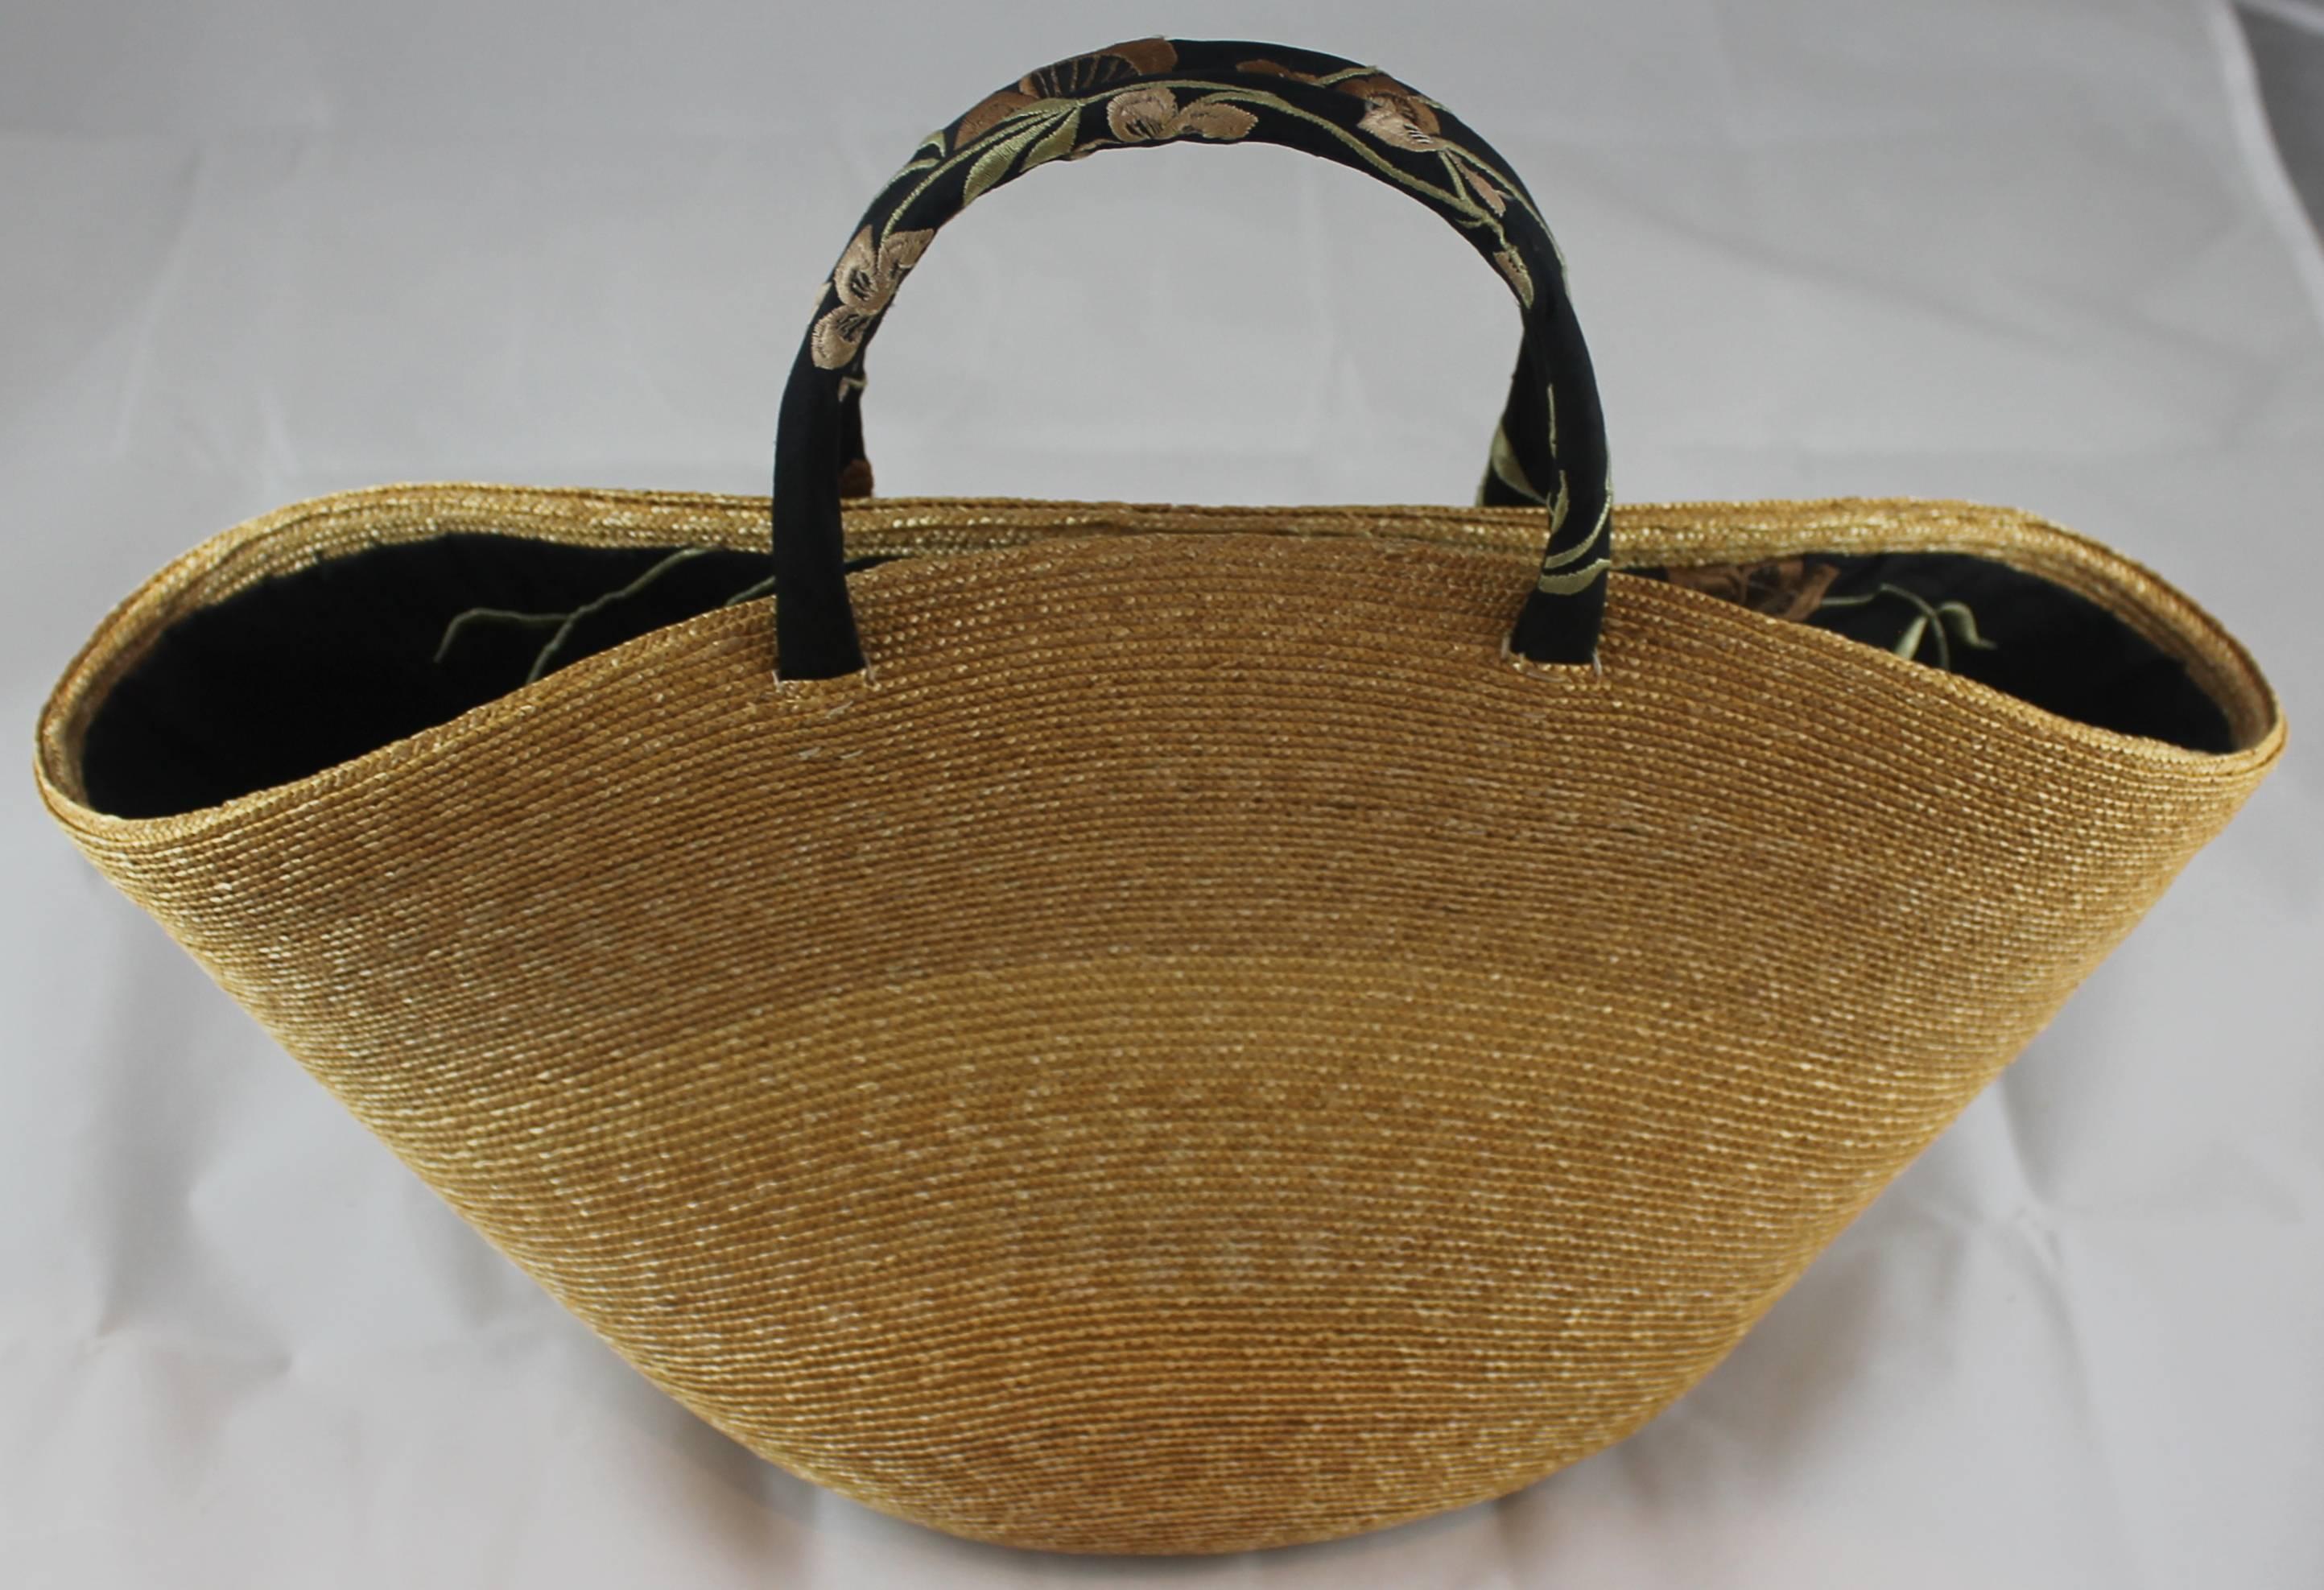 Suzanne Couture Millinery Small Tan Woven Straw Bag with Floral Handles. This cute woven straw bag is a tan color and has handles and matching lining that is black silk with a colored floral print. It is in excellent condition. There is a matching